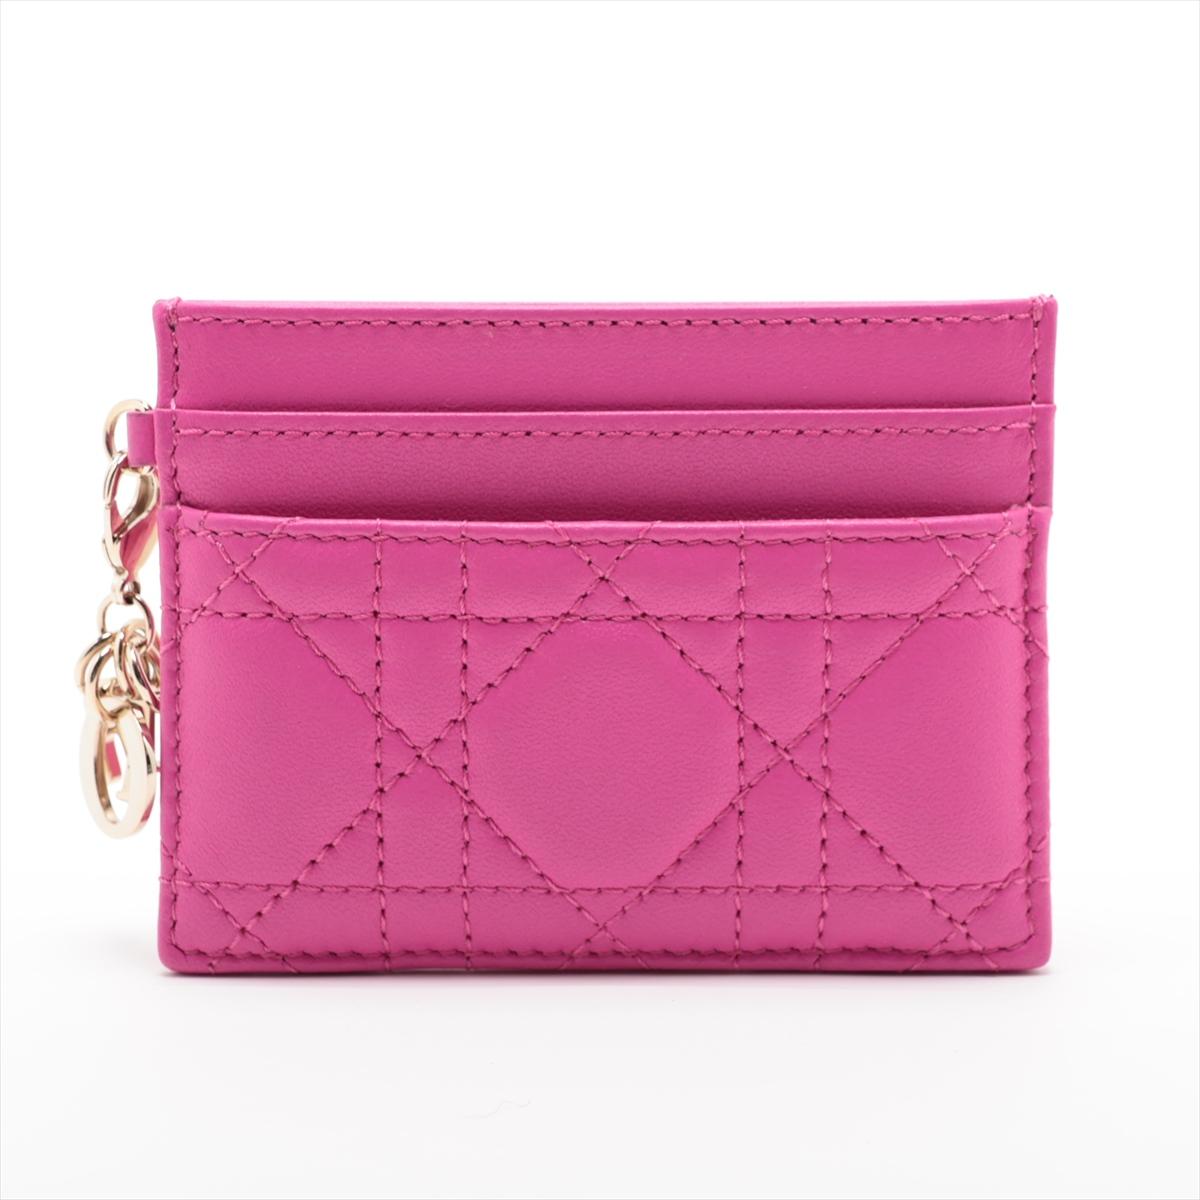 The Christian Dior Lady Dior Lambskin Cannage Card Case in Fuchsia Pink epitomizes luxury and sophistication. Crafted from sumptuous lambskin leather, the card case showcases Dior's iconic Cannage quilting, exuding timeless elegance. Its compact